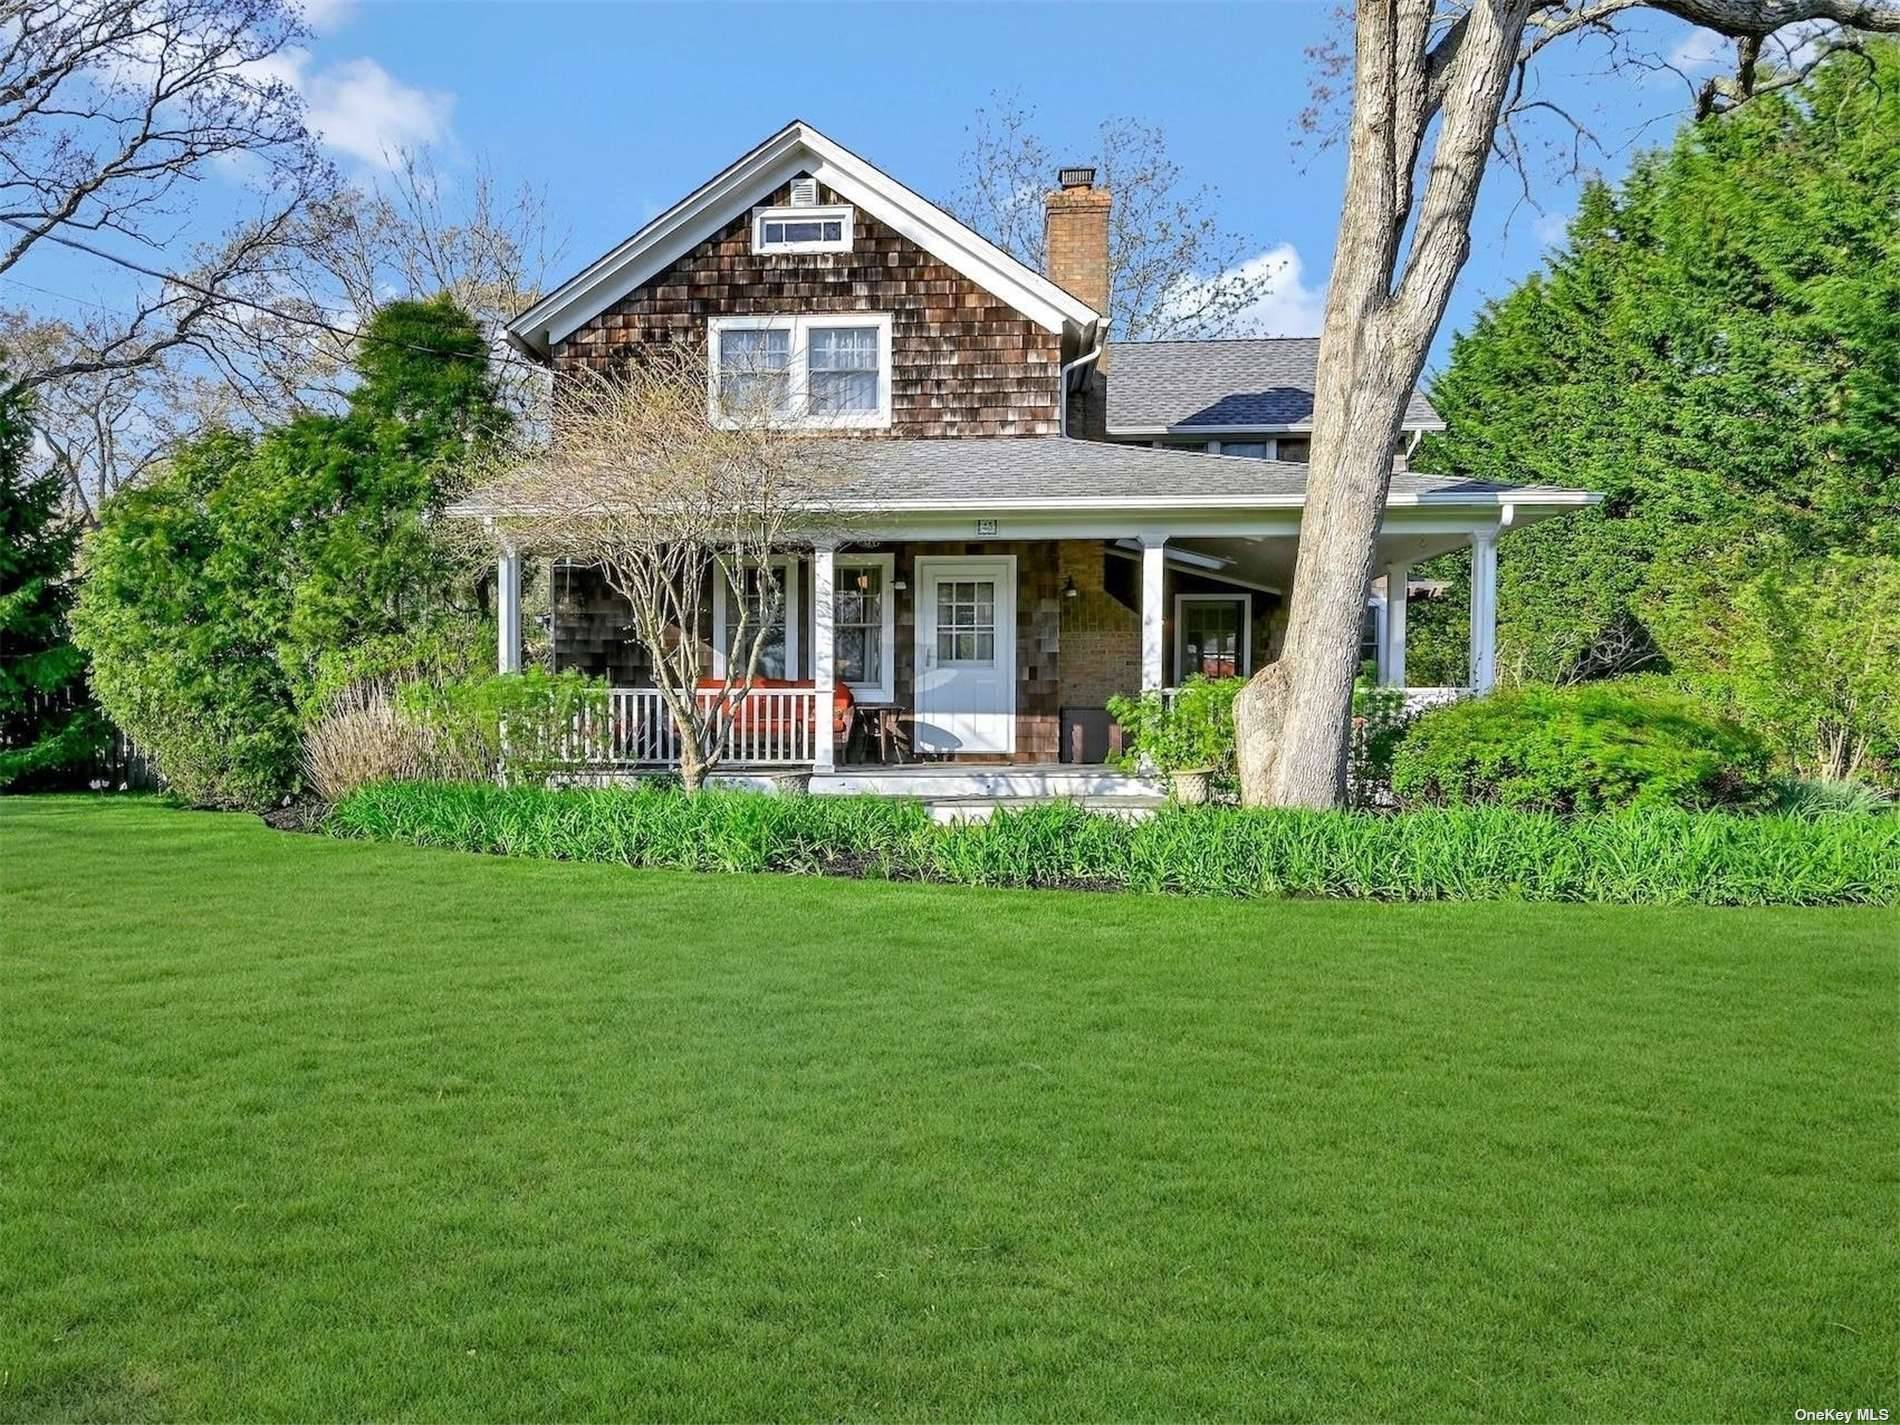 Just minutes to local beaches, shops and restaurants in the beautiful town of East Quogue, this Nantucket style home is a stunning 4 bedroom, 3 and a half bath retreat ...